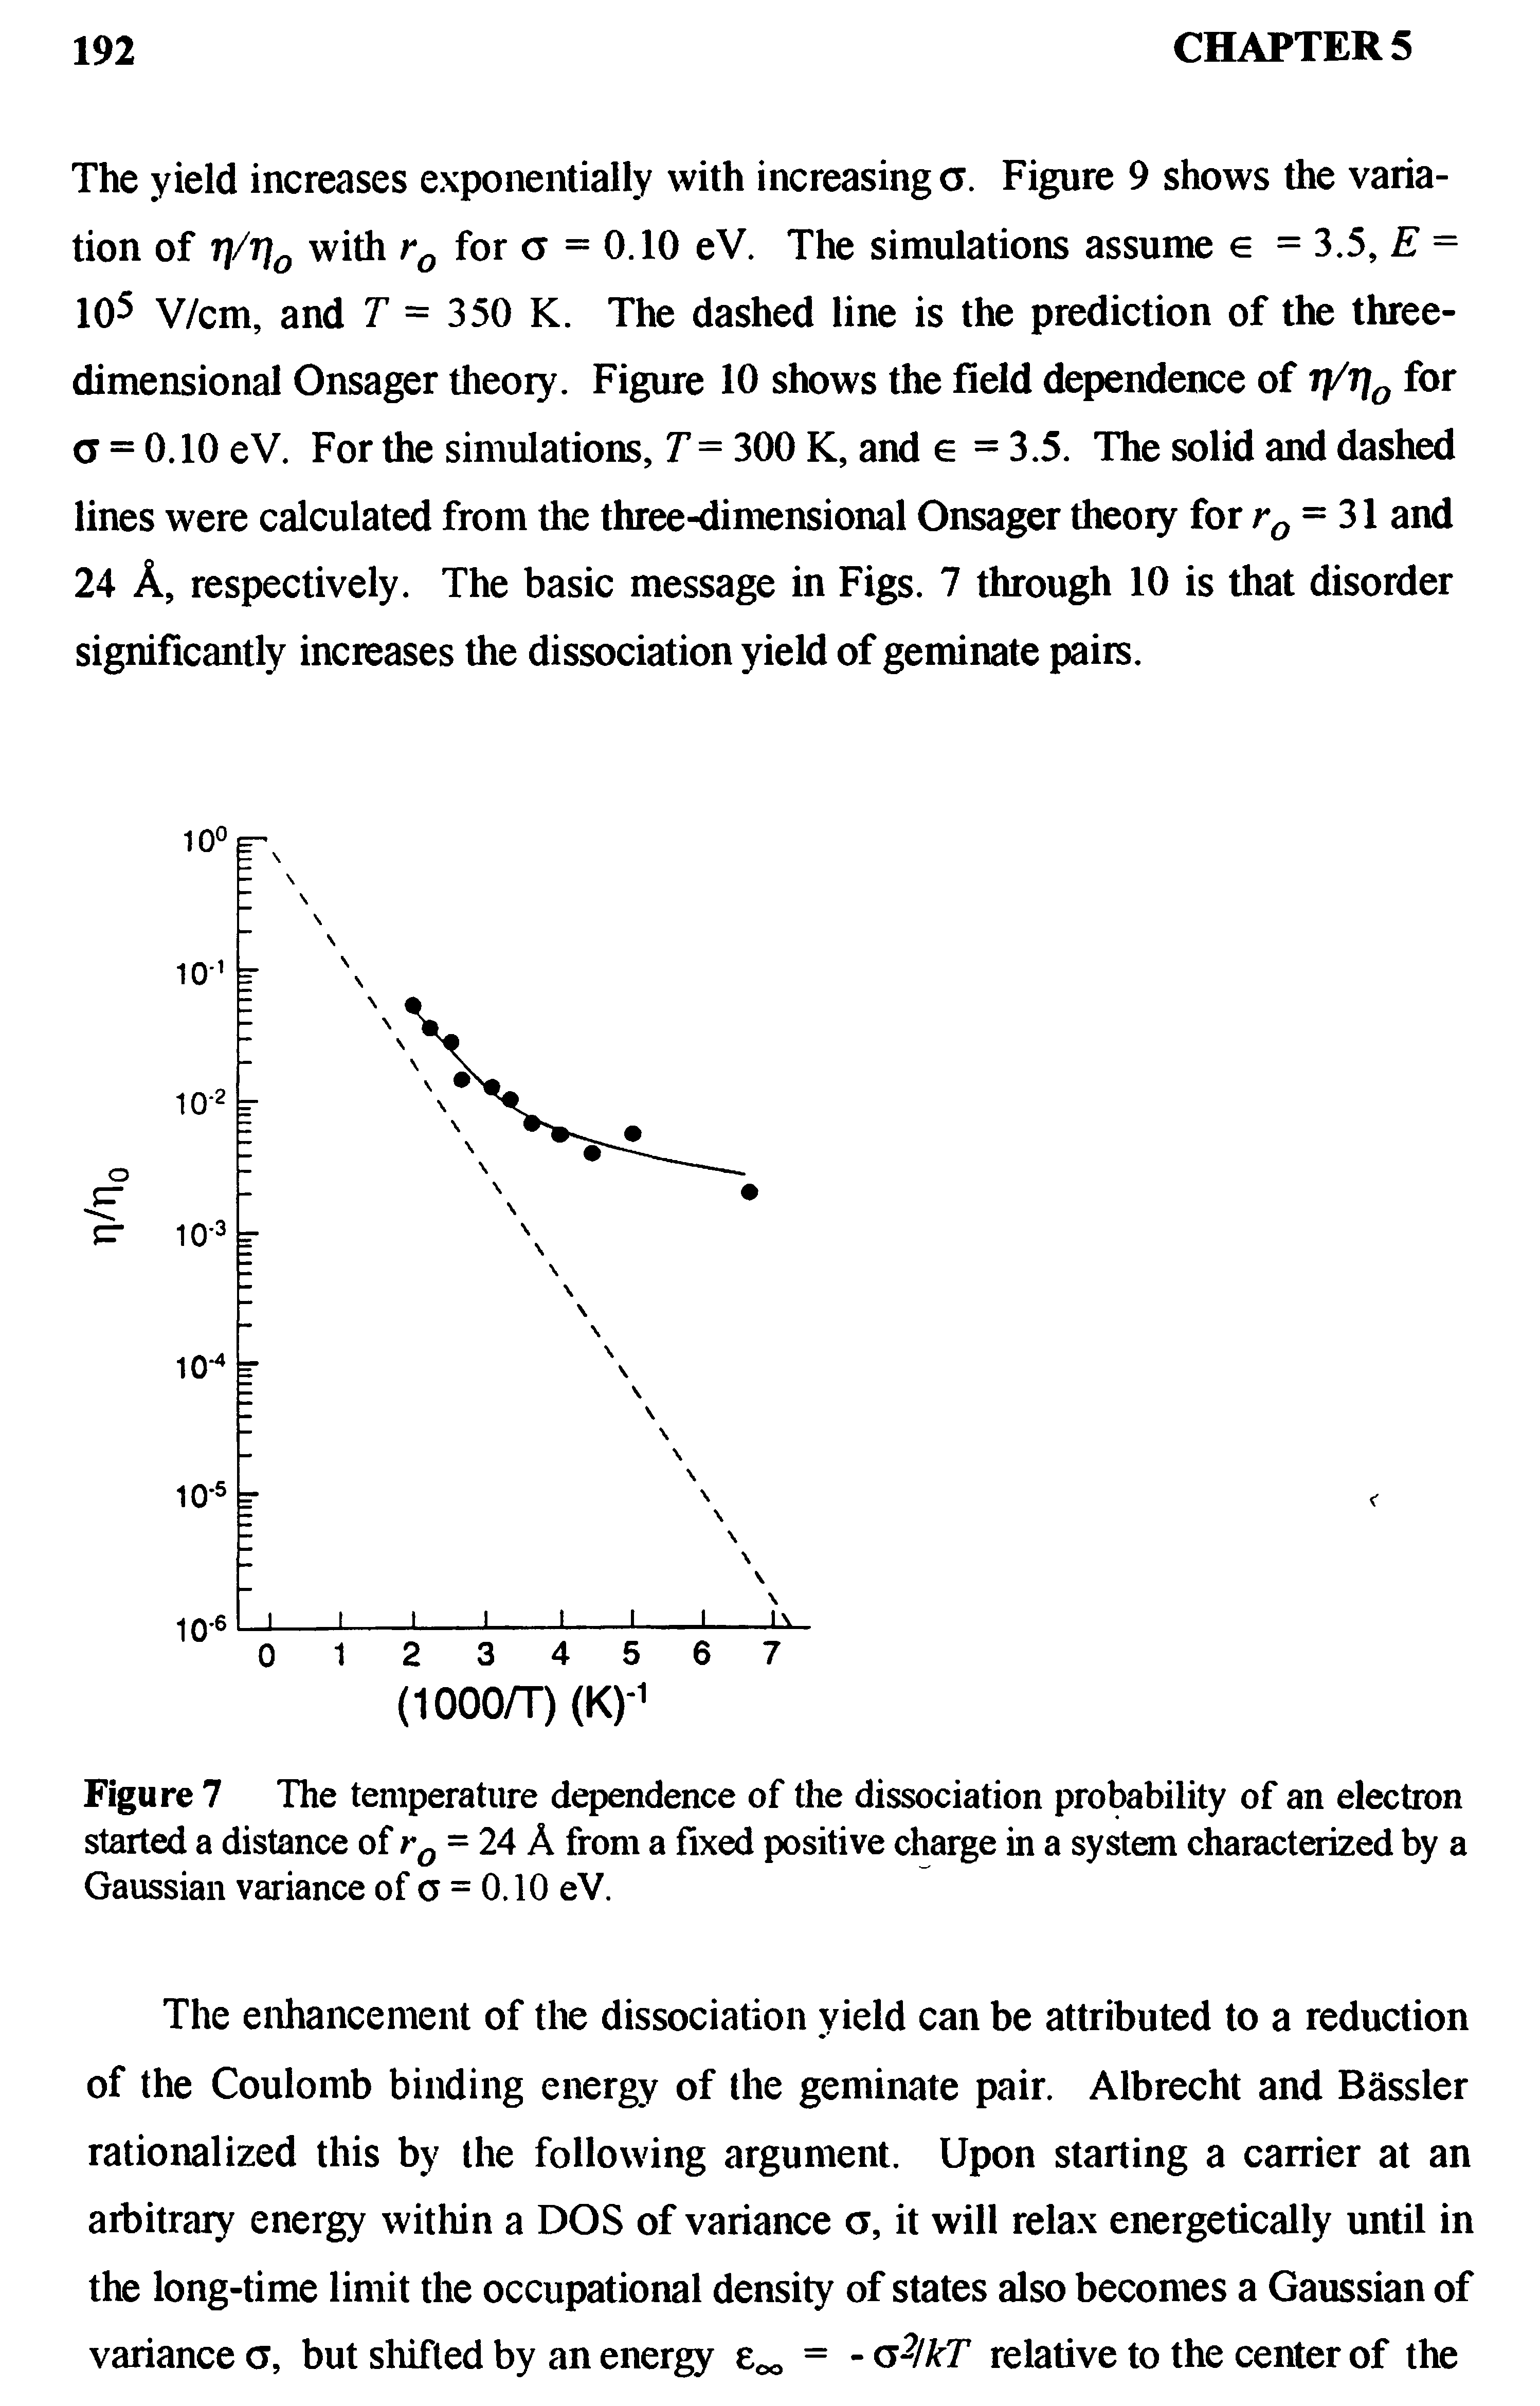 Figure 7 The temperature dependence of the dissociation probability of an electron started a distance of rQ - 24 A from a fixed positive charge in a system characterized by a Gaussian variance of a = 0.10 eV.